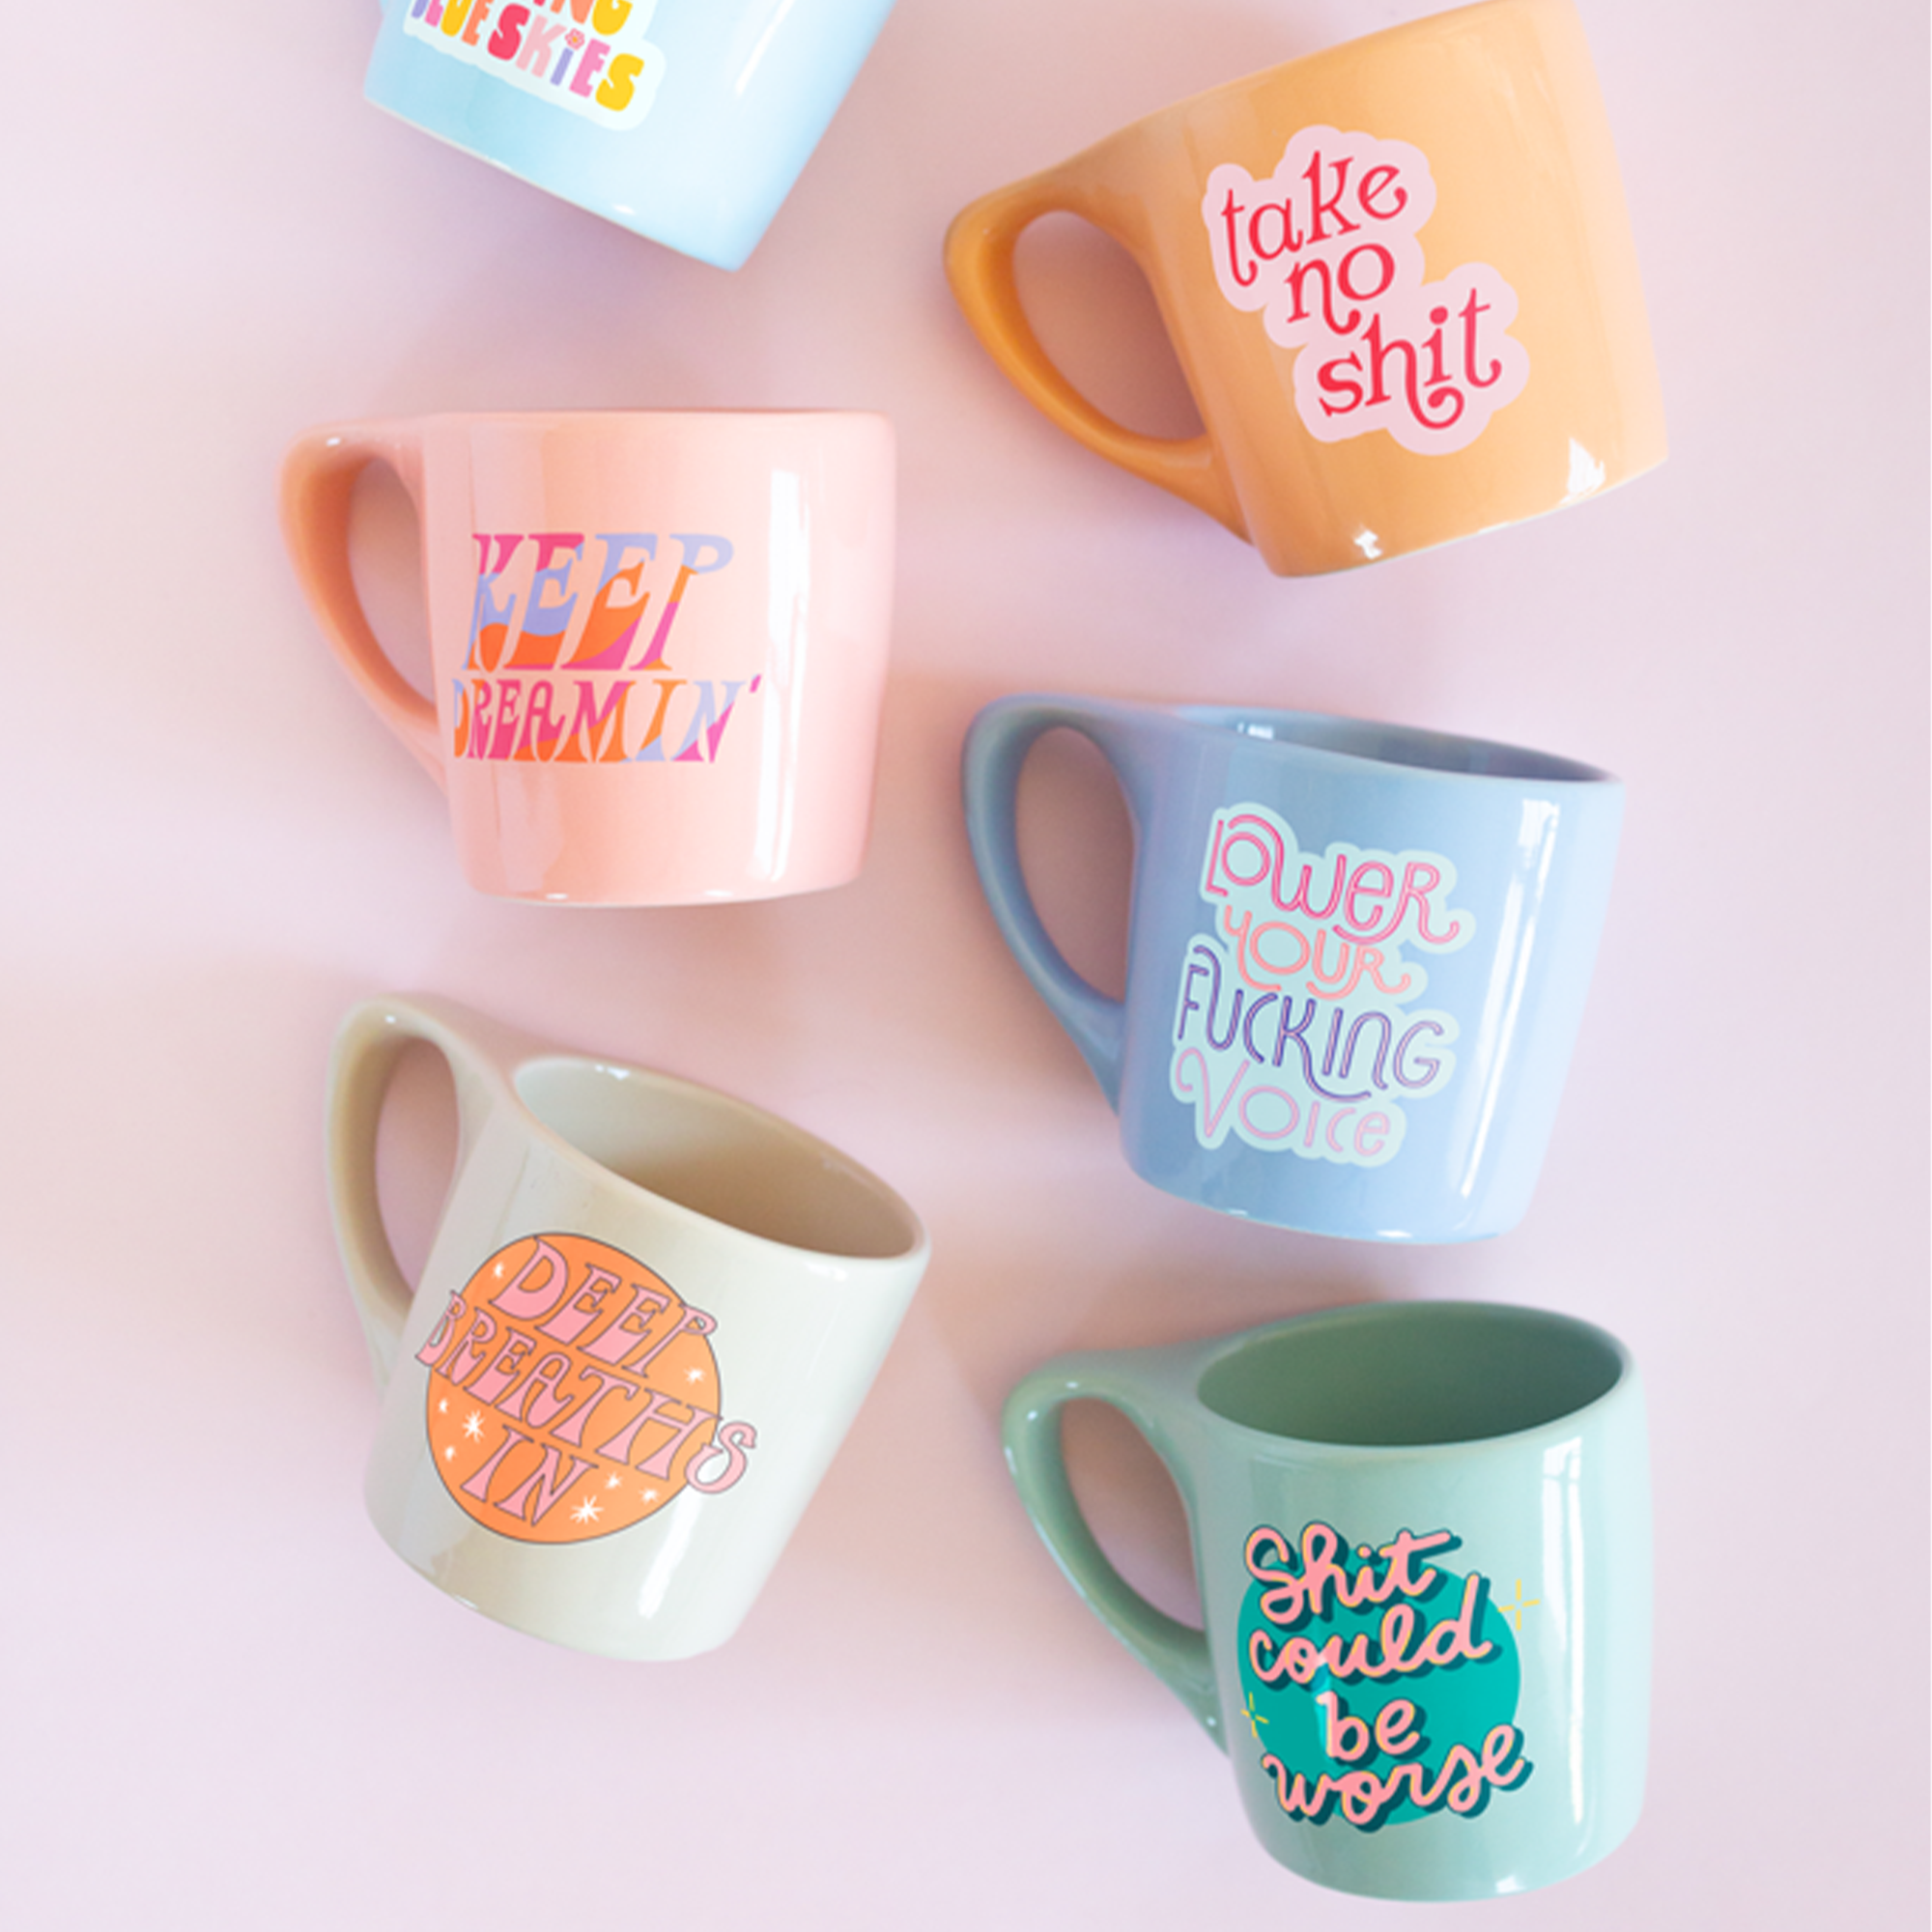 Let That Shit Go Element Mug– Talking Out Of Turn